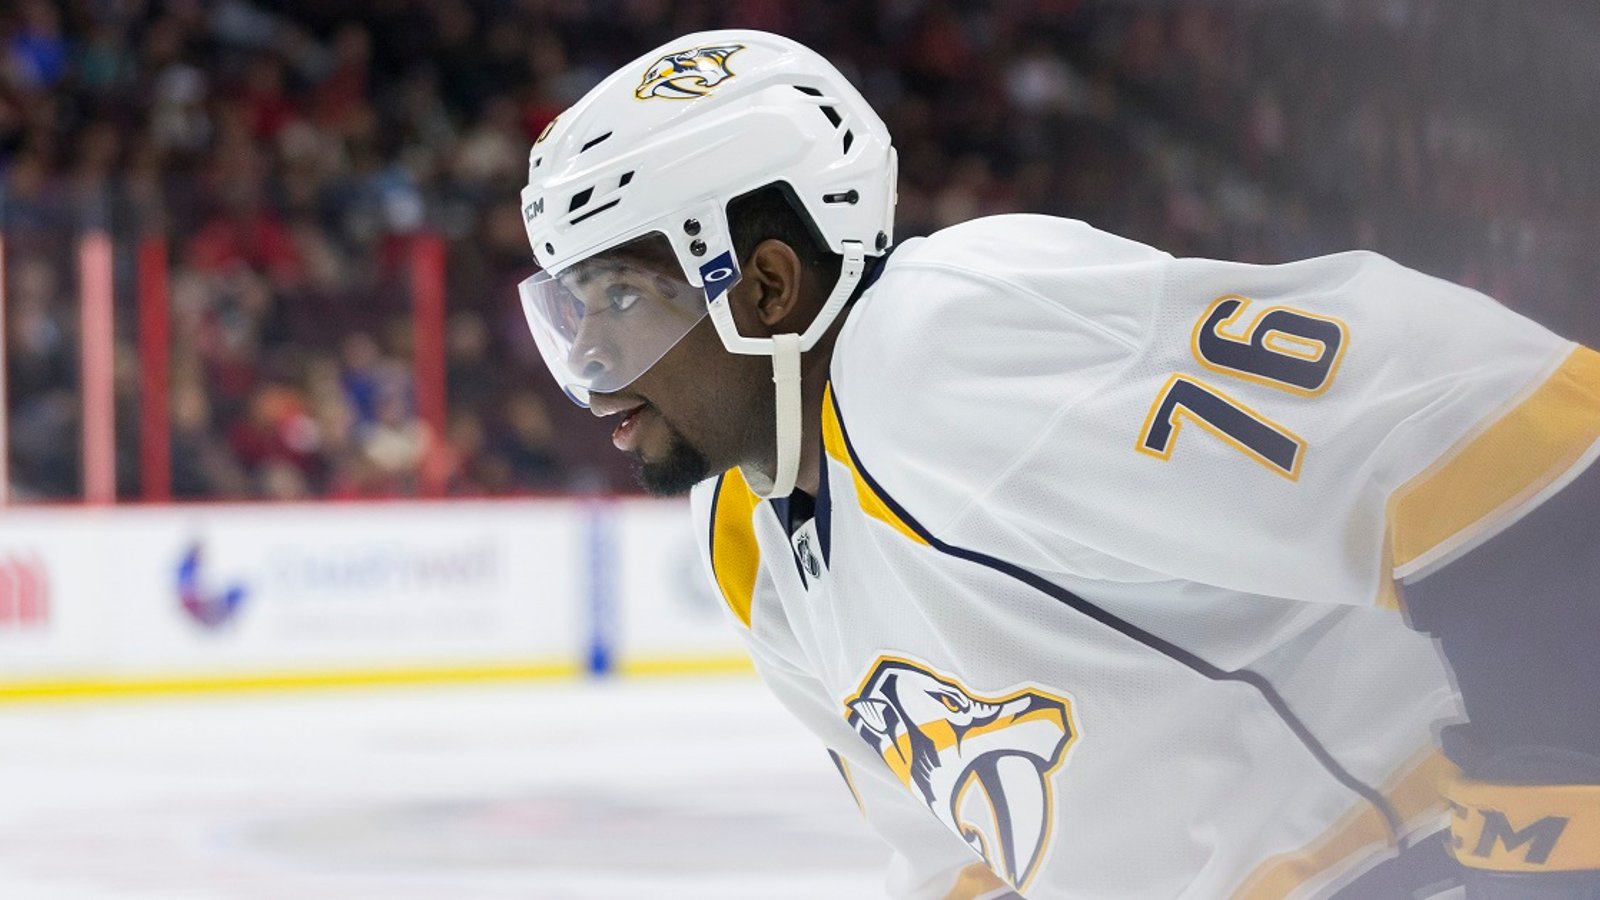 Breaking: P.K. Subban trying to get under the Penguins skin during warmups. 